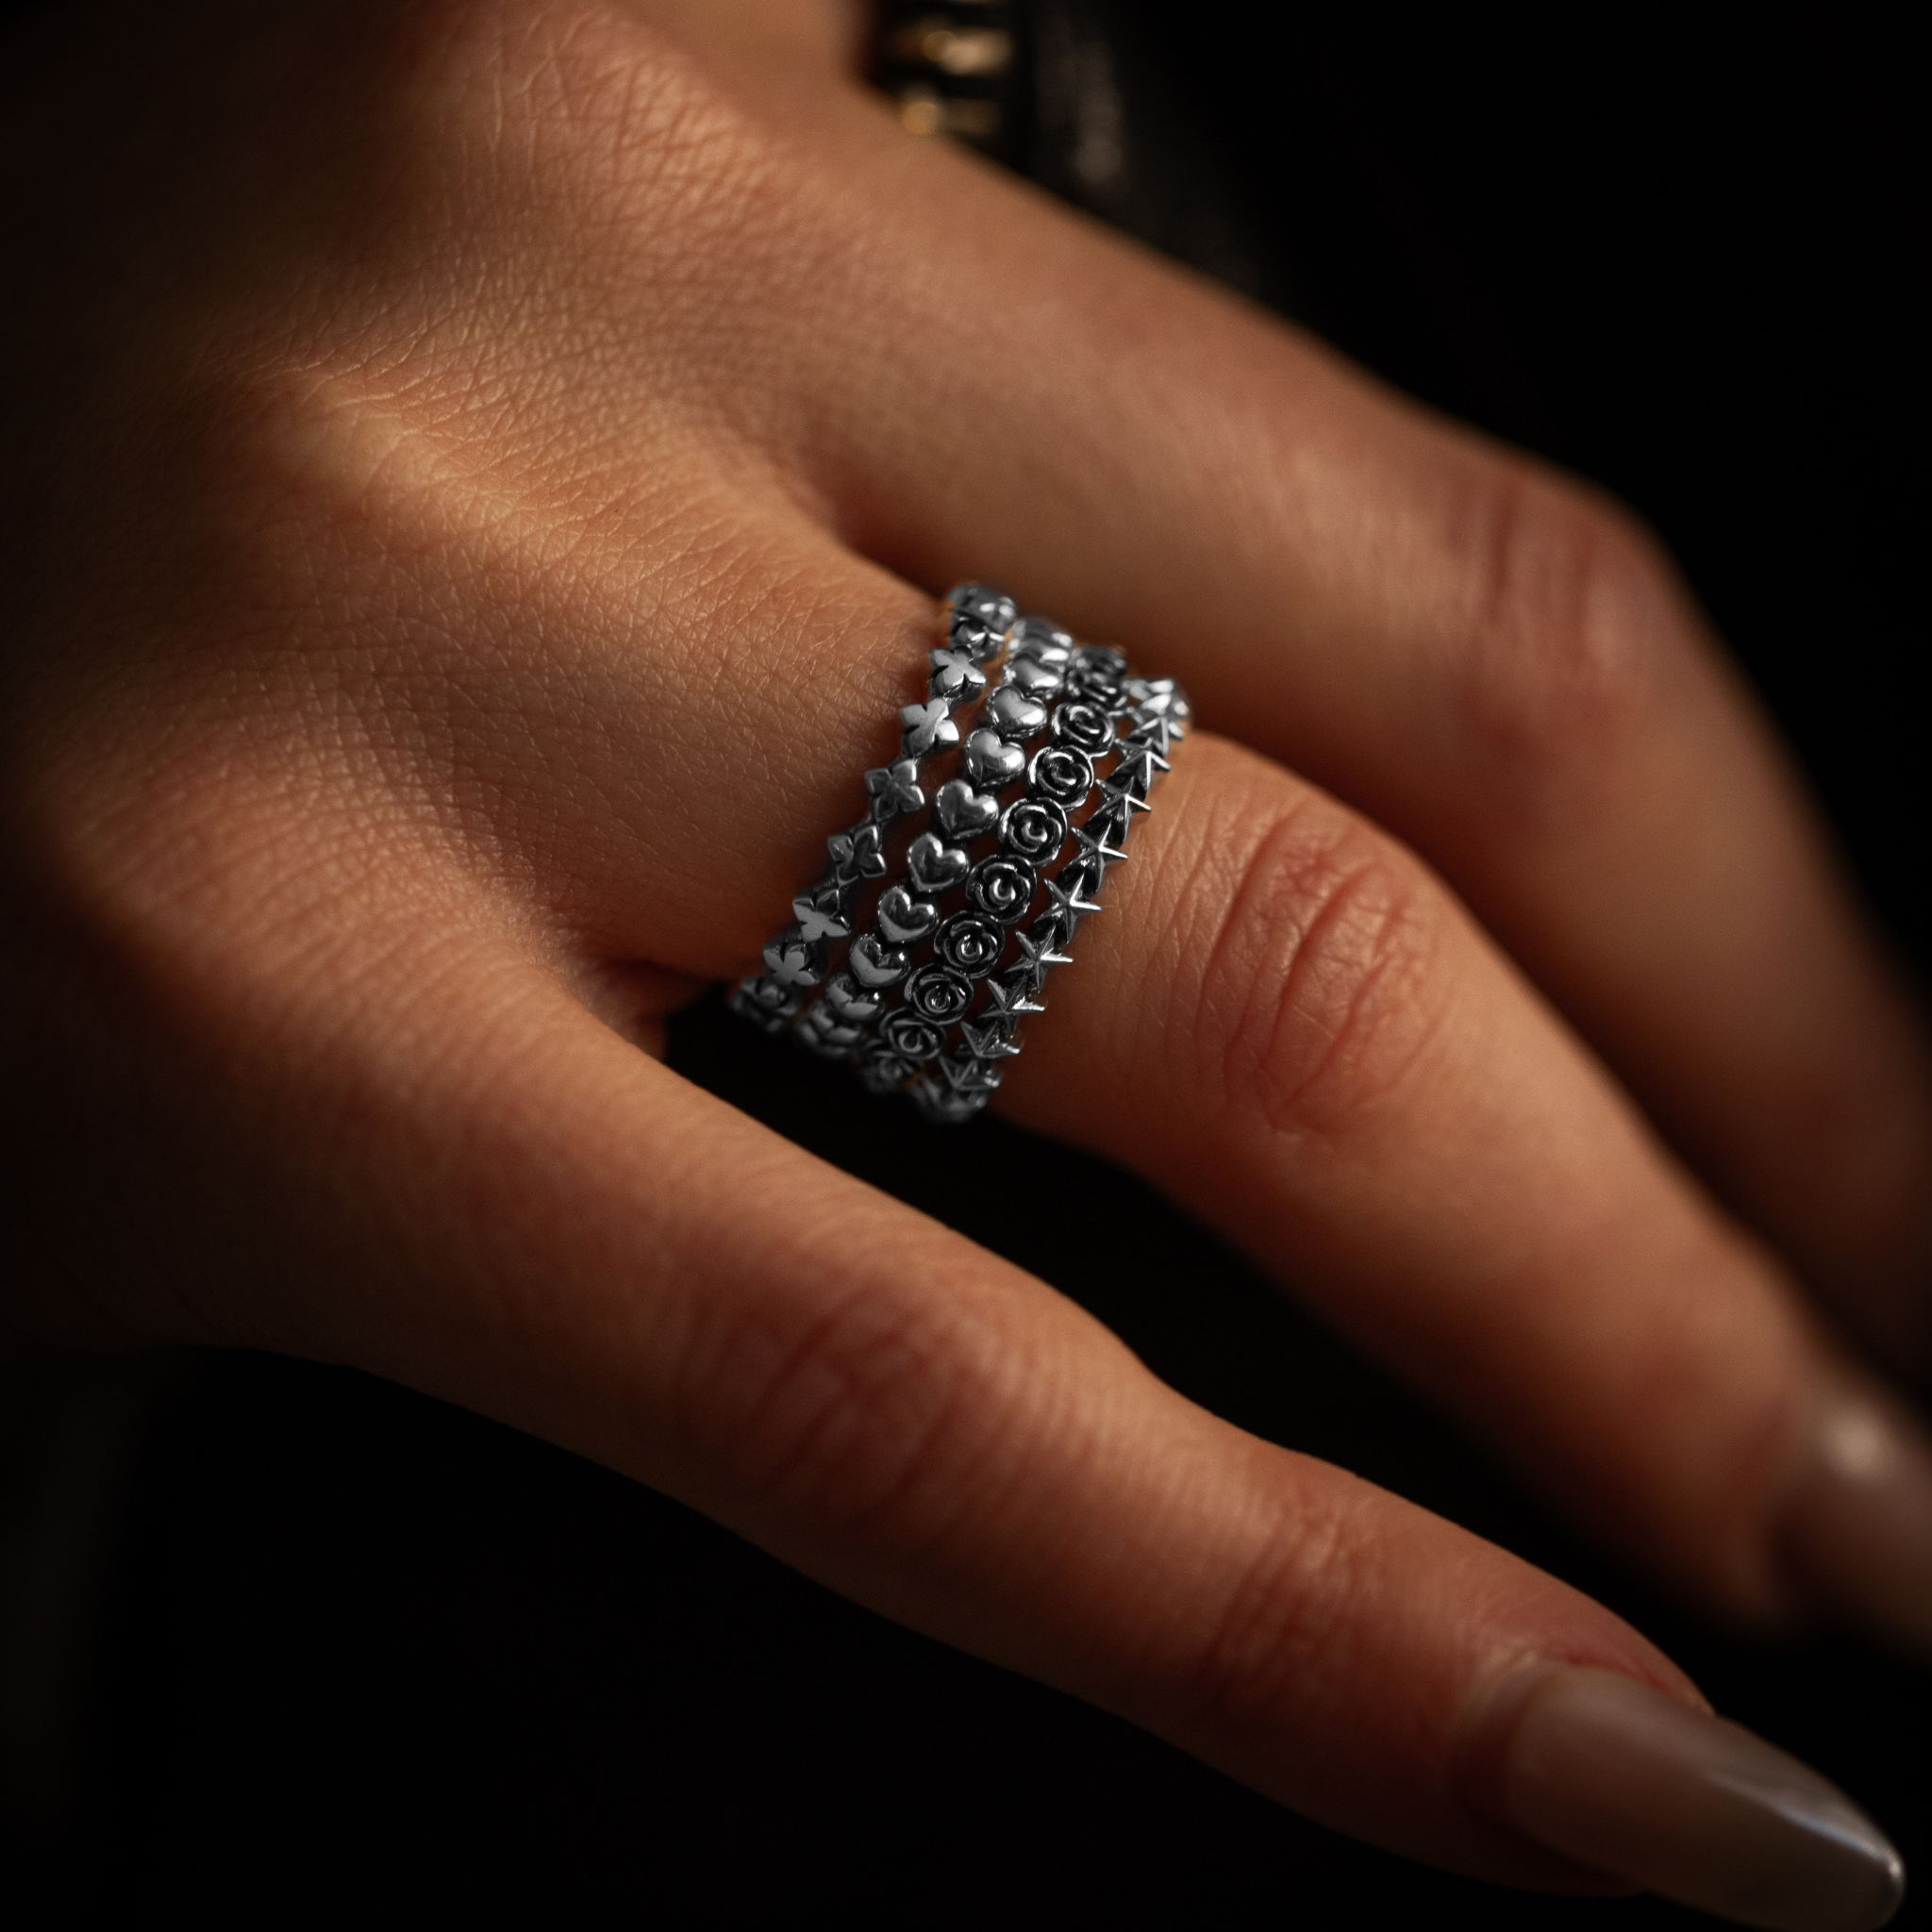 Micro Stackable Motif Rings on Models Hand